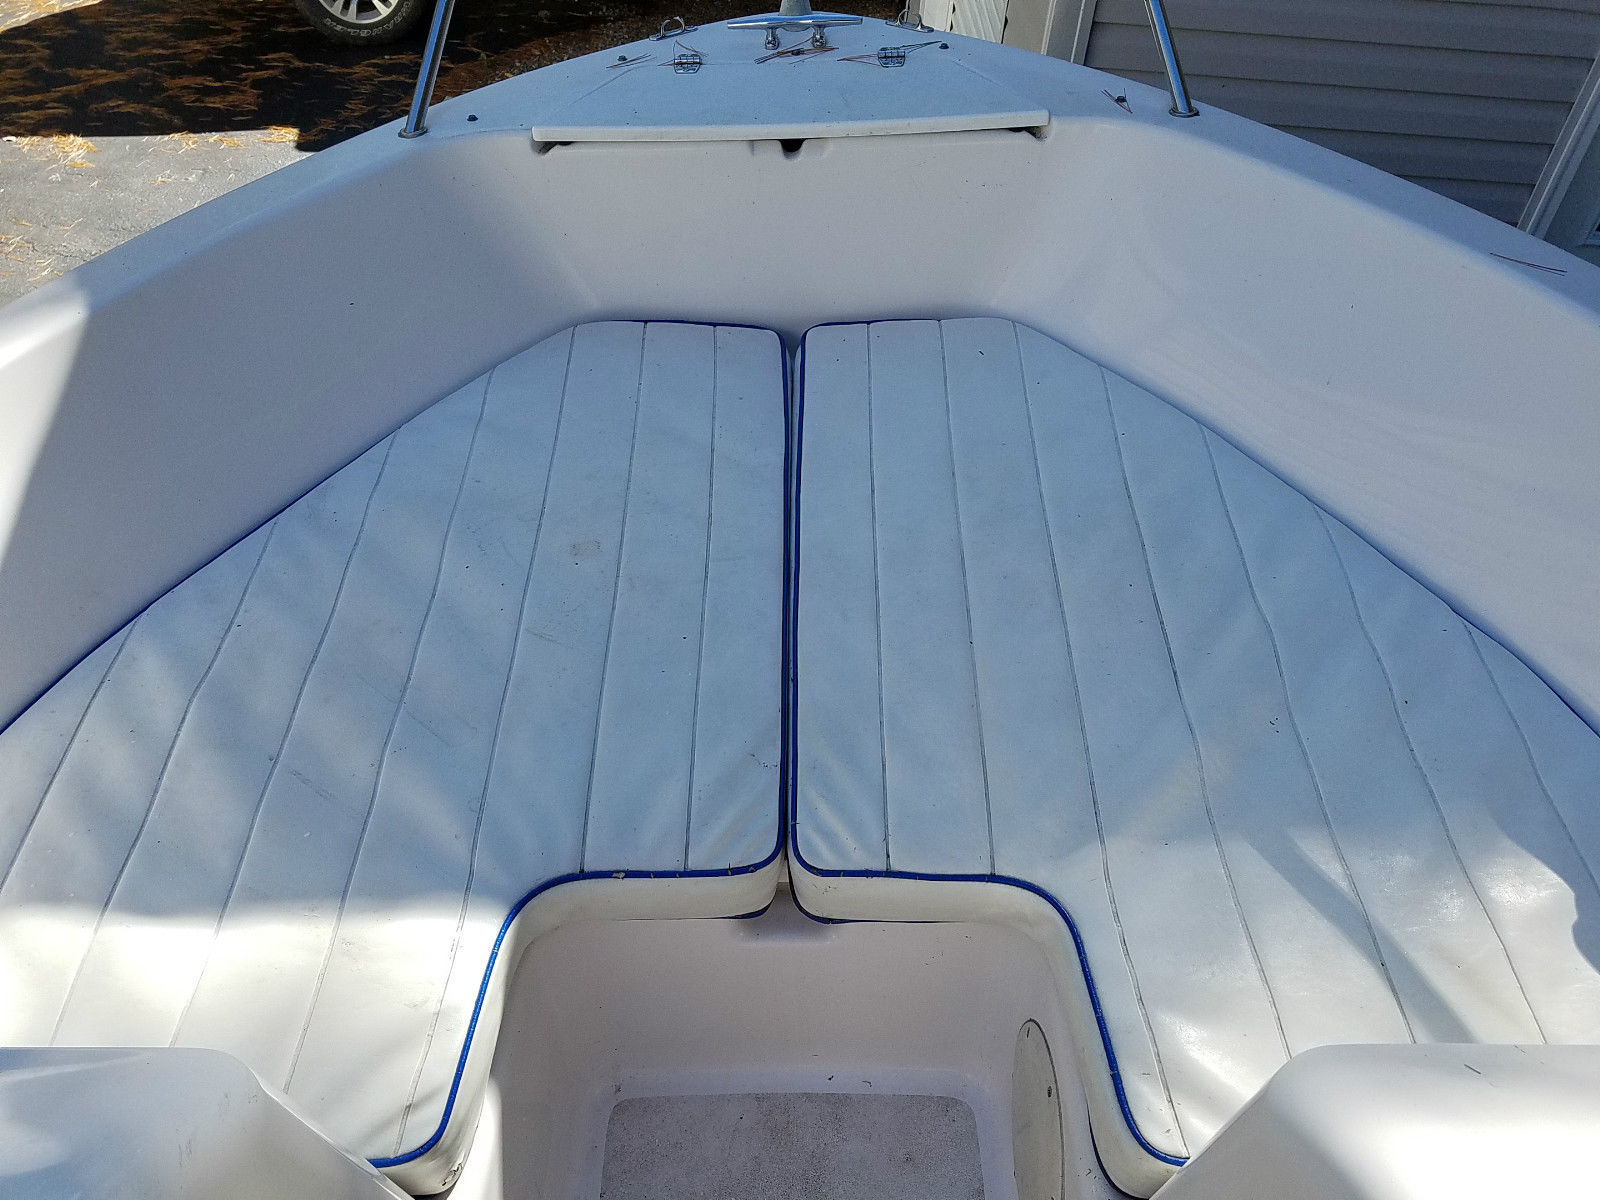 proline 202 dc 1999 for sale for $9,999 - boats-from-usa.com